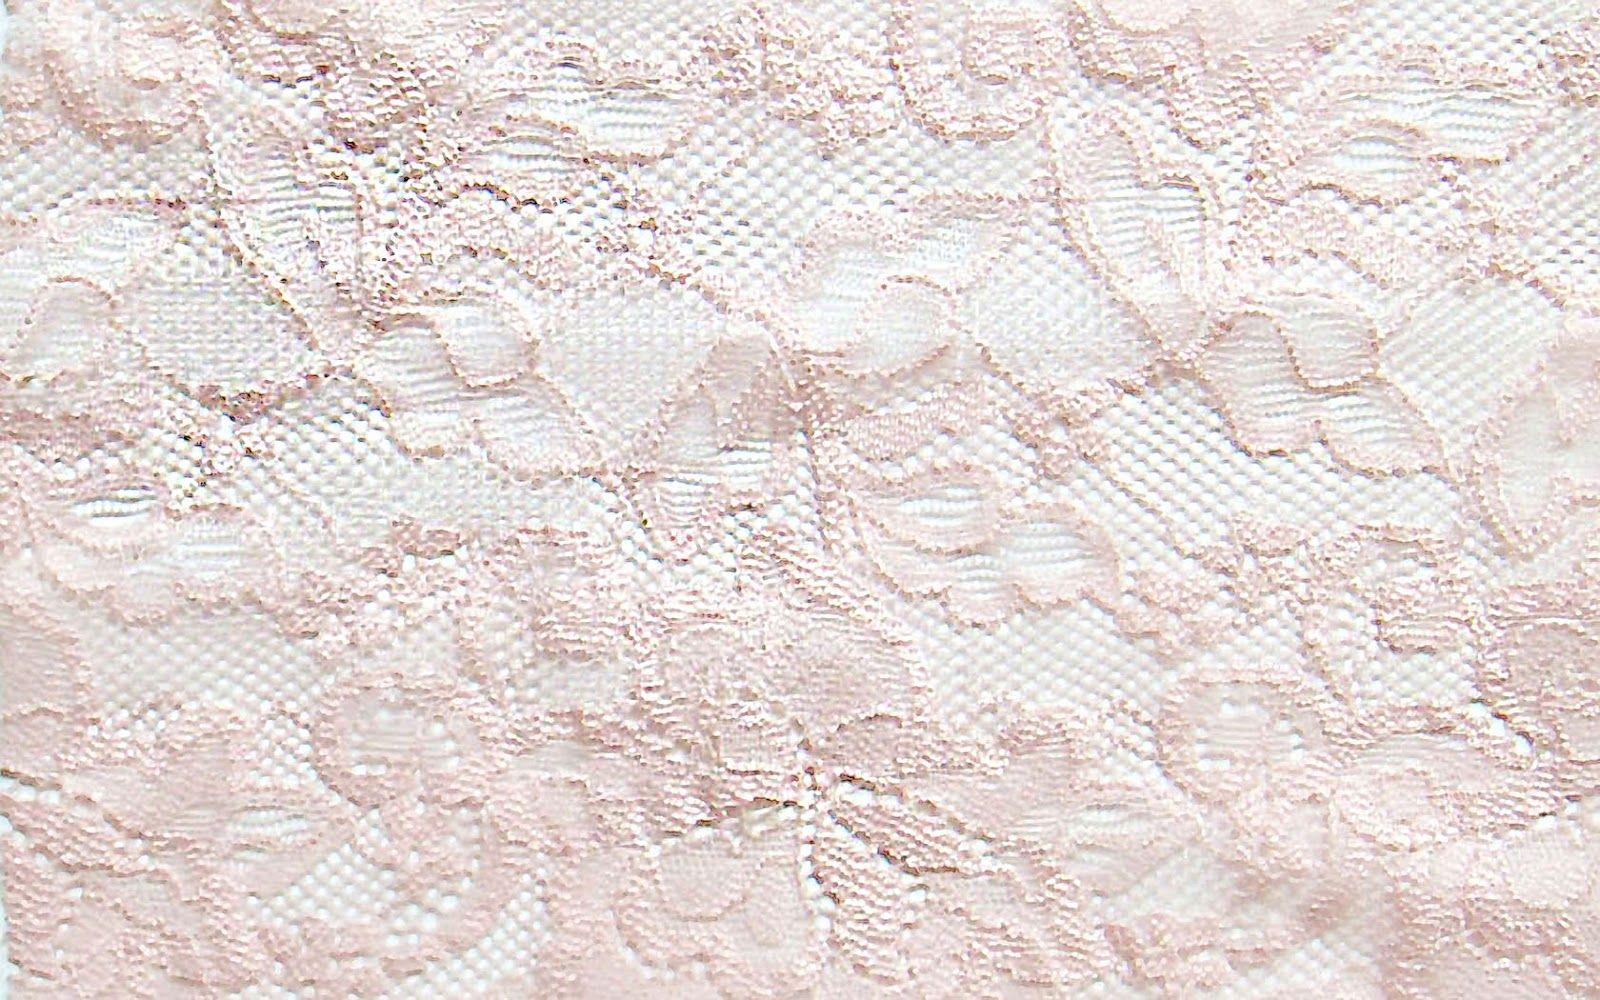 Lace Tumblr Background 8. vintage photography